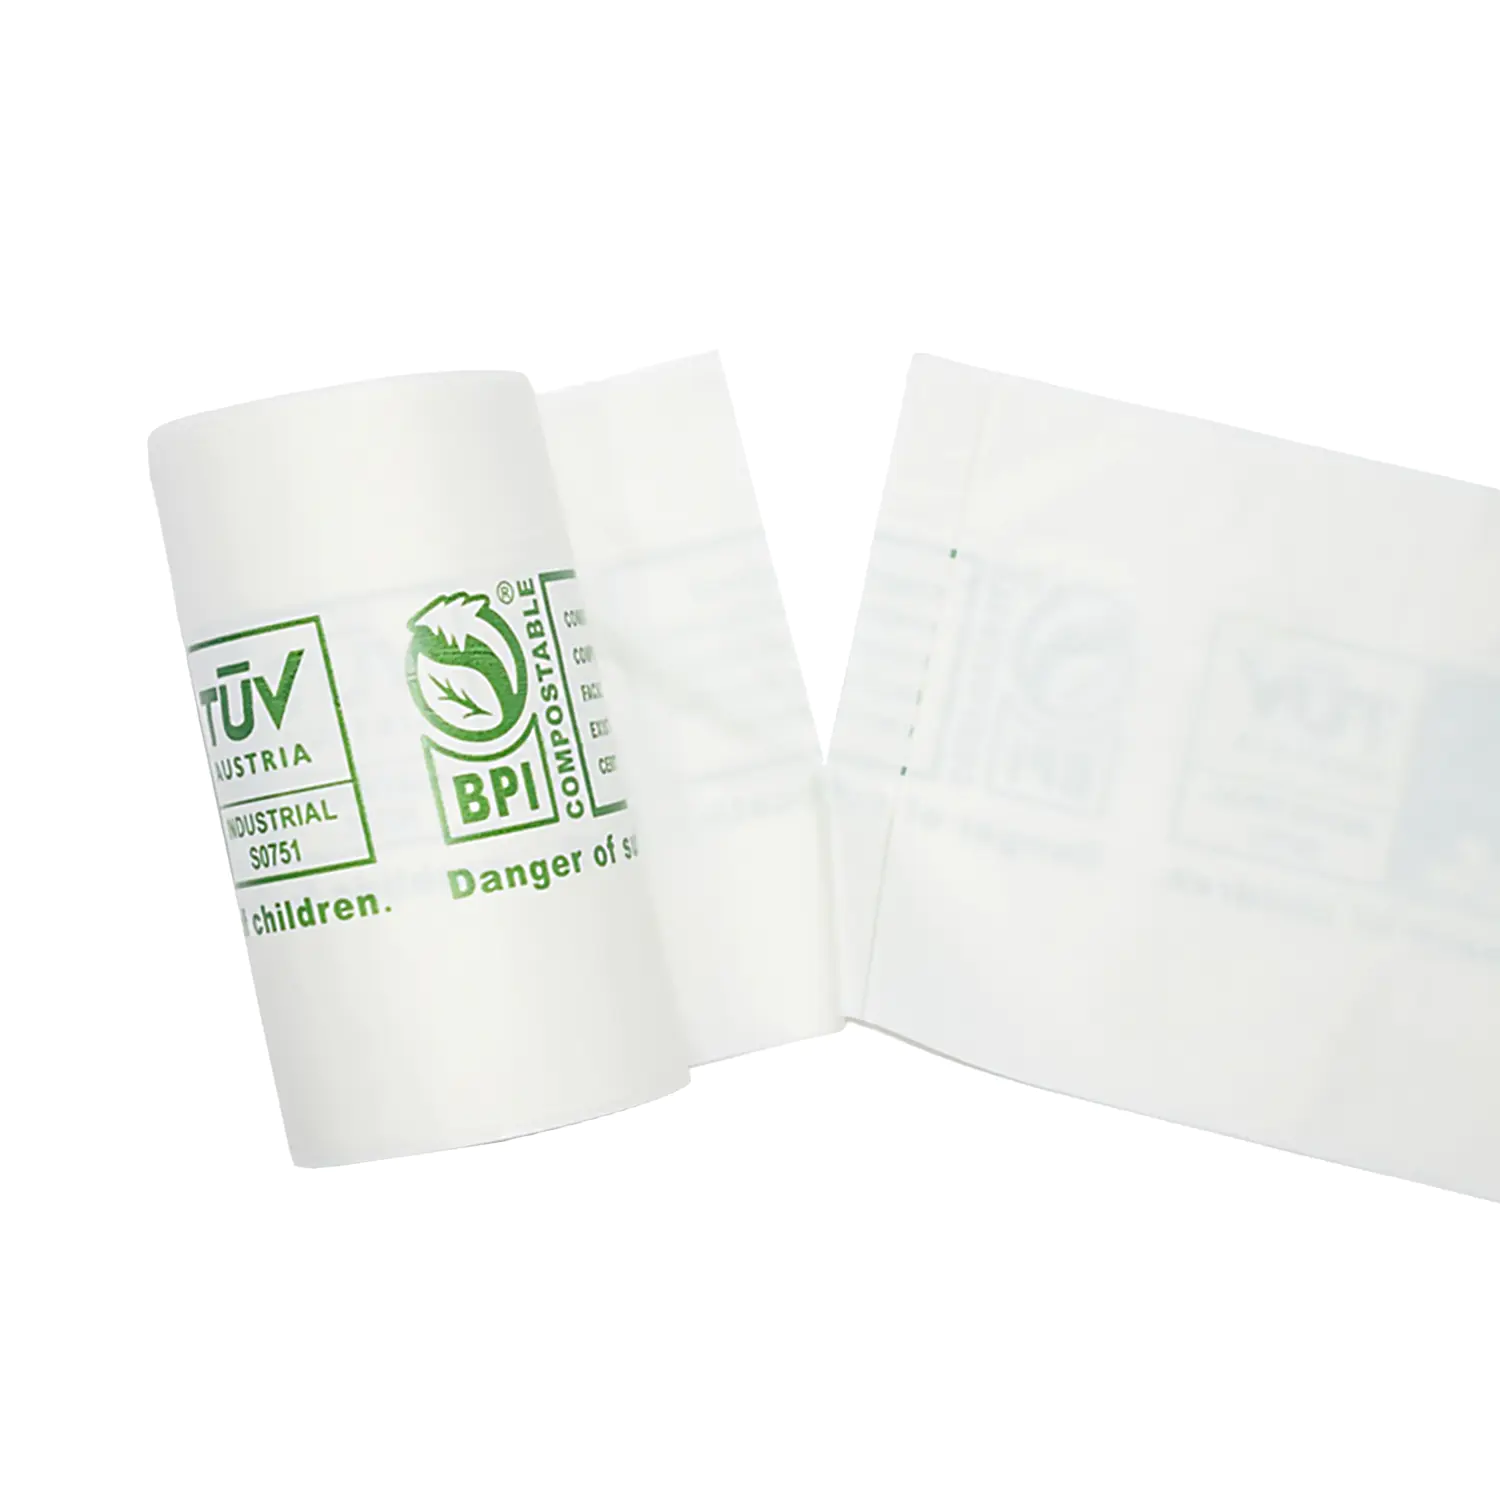 100% compostable bags biodegradable rubbish bags